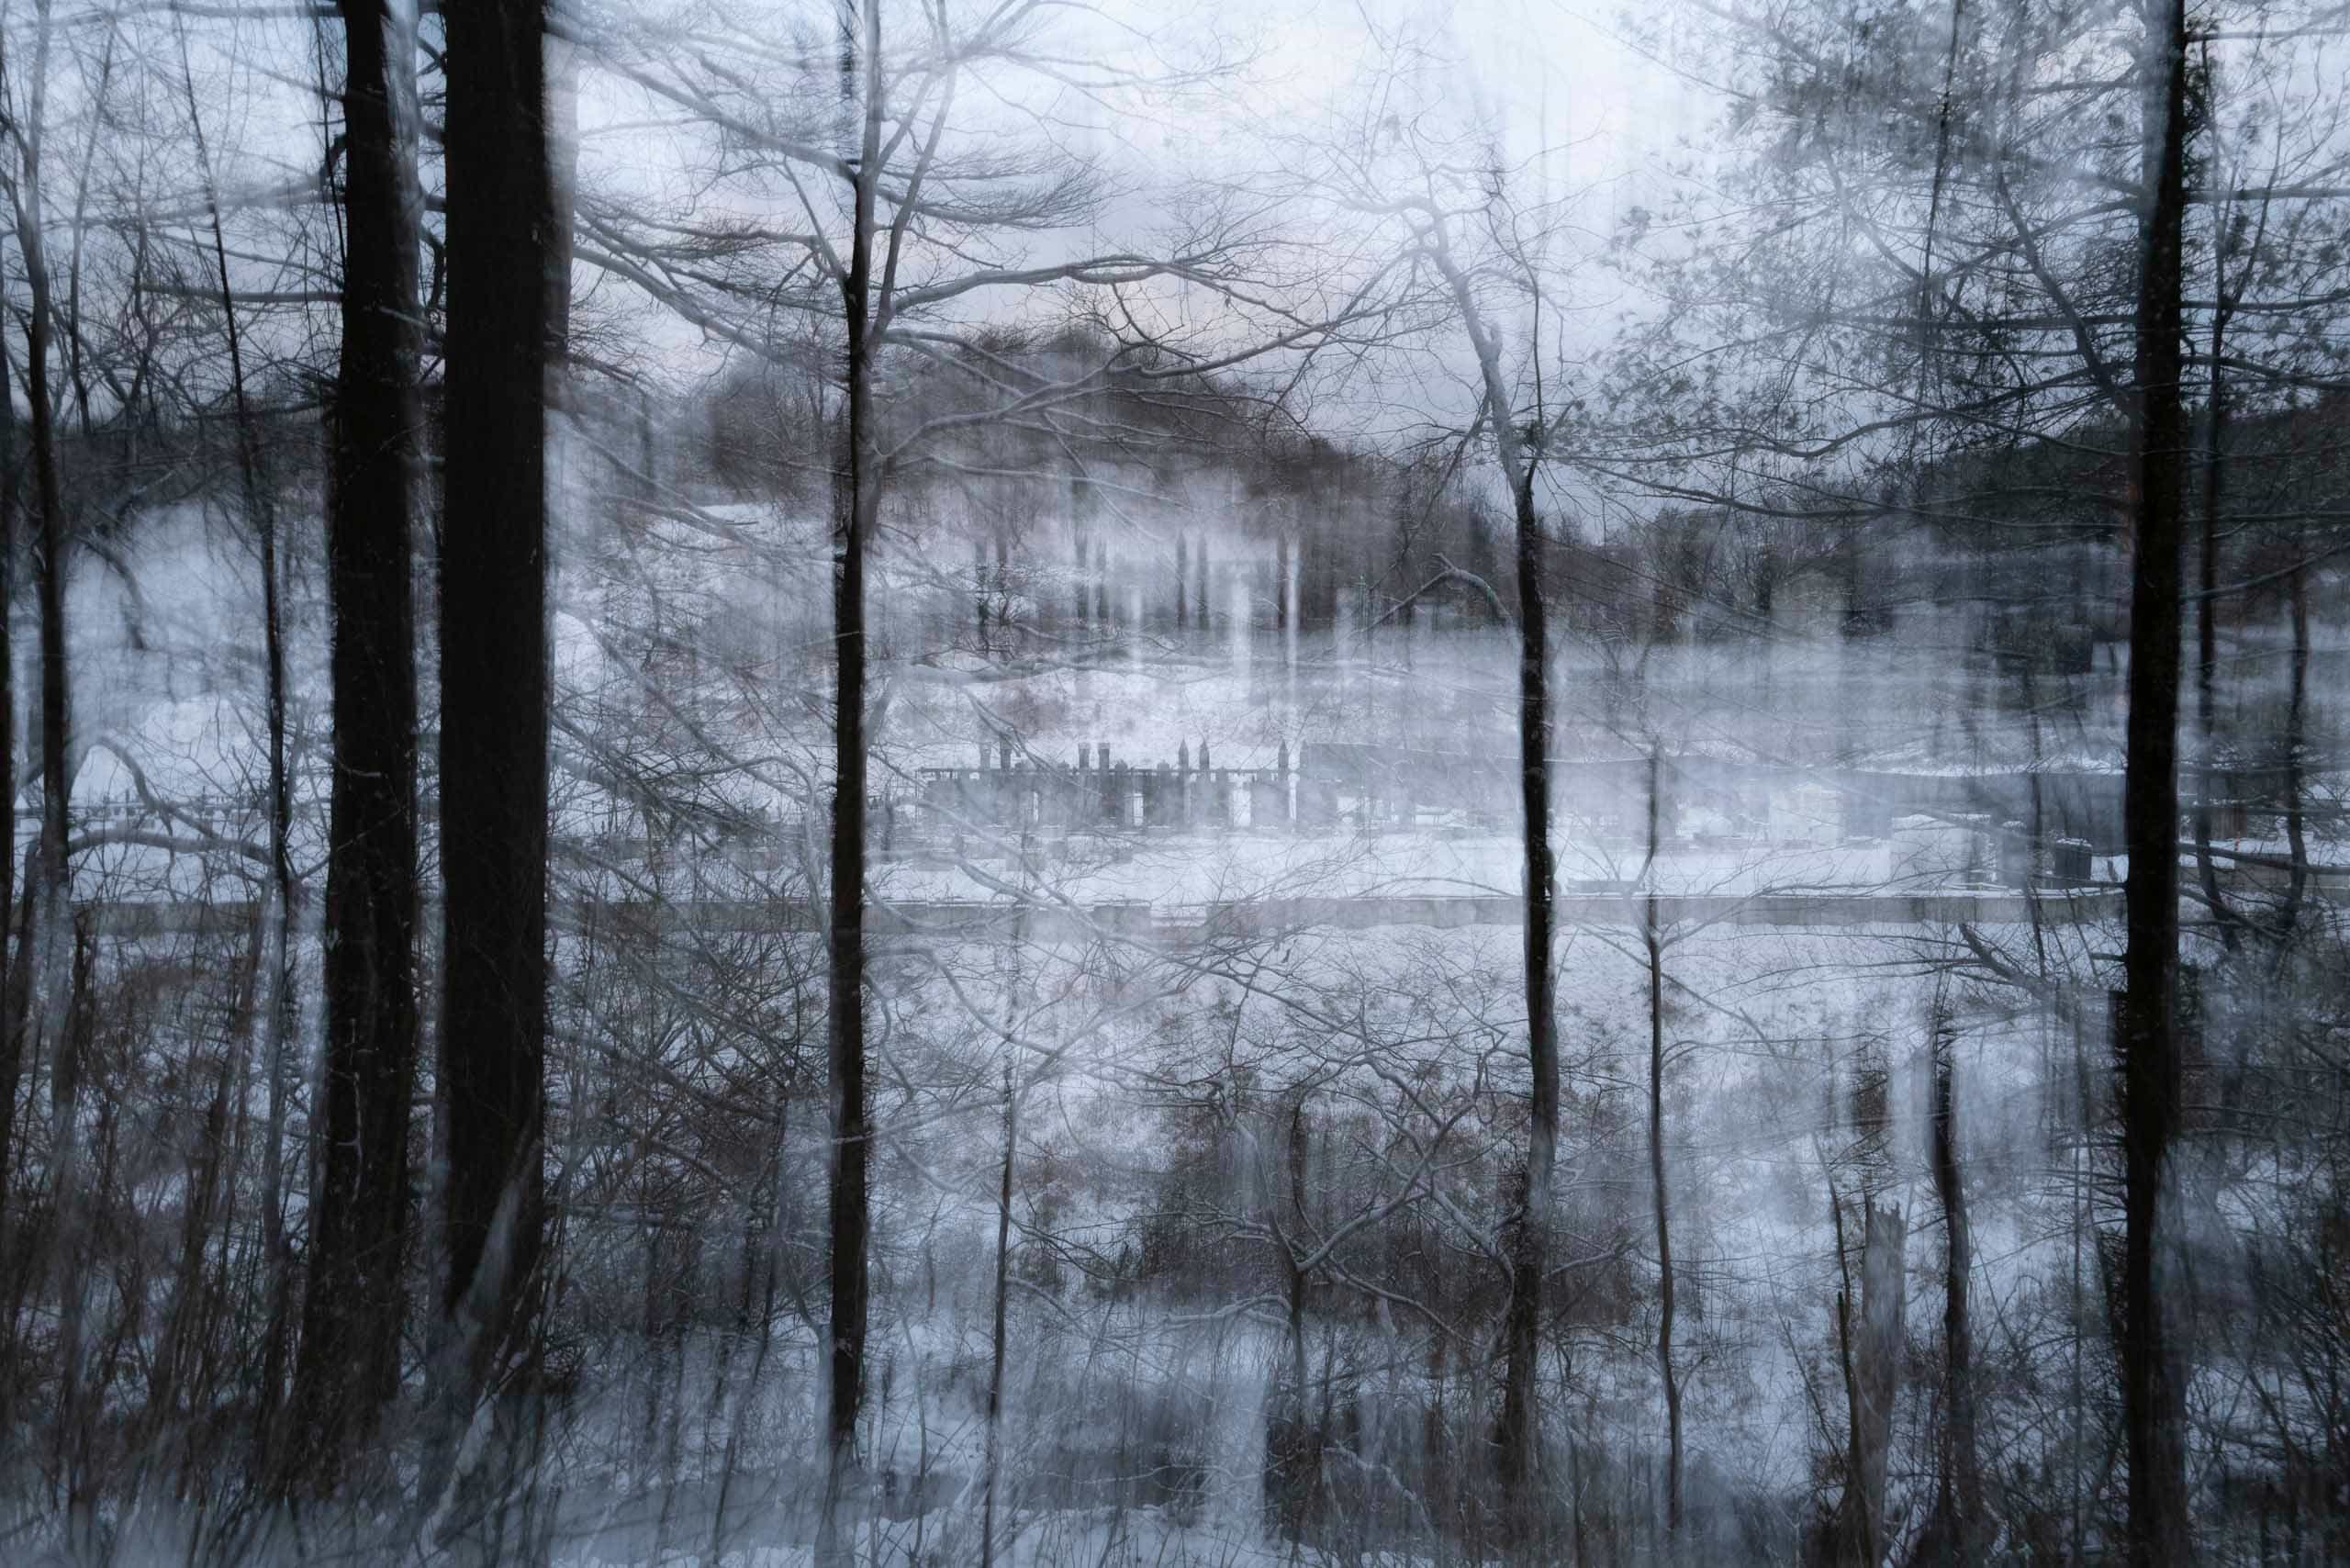 A long-exposure image of trees and a well pad in the snow.